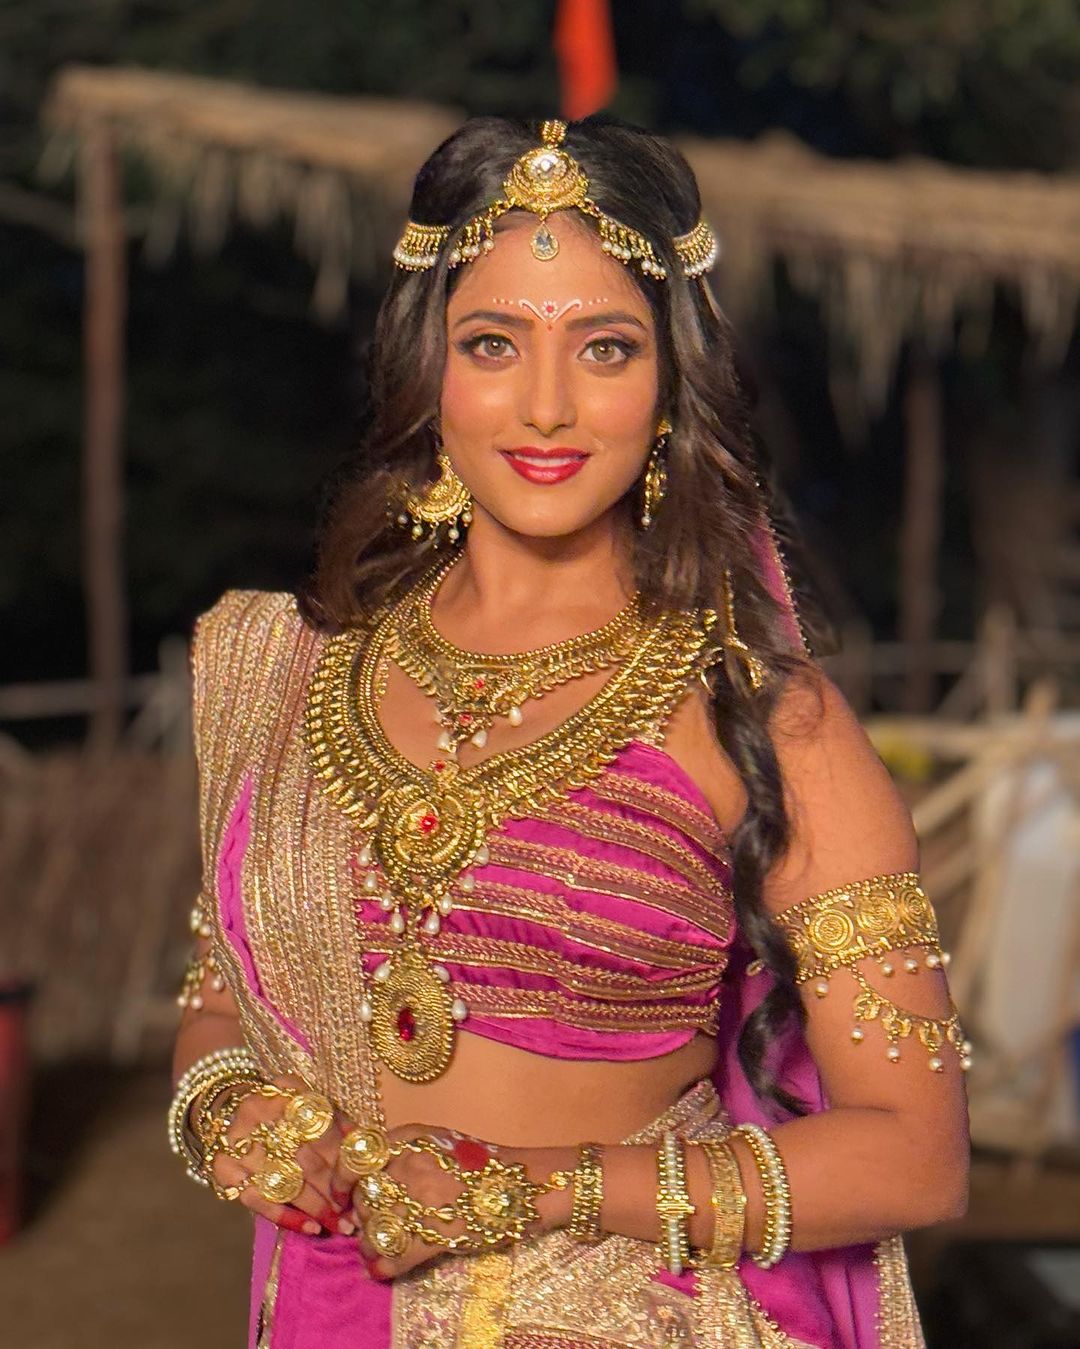 Jhansi Ki Rani Actress Ulka Gupta Shared Glimpses Of Her Exciting New Project. See What It Is!